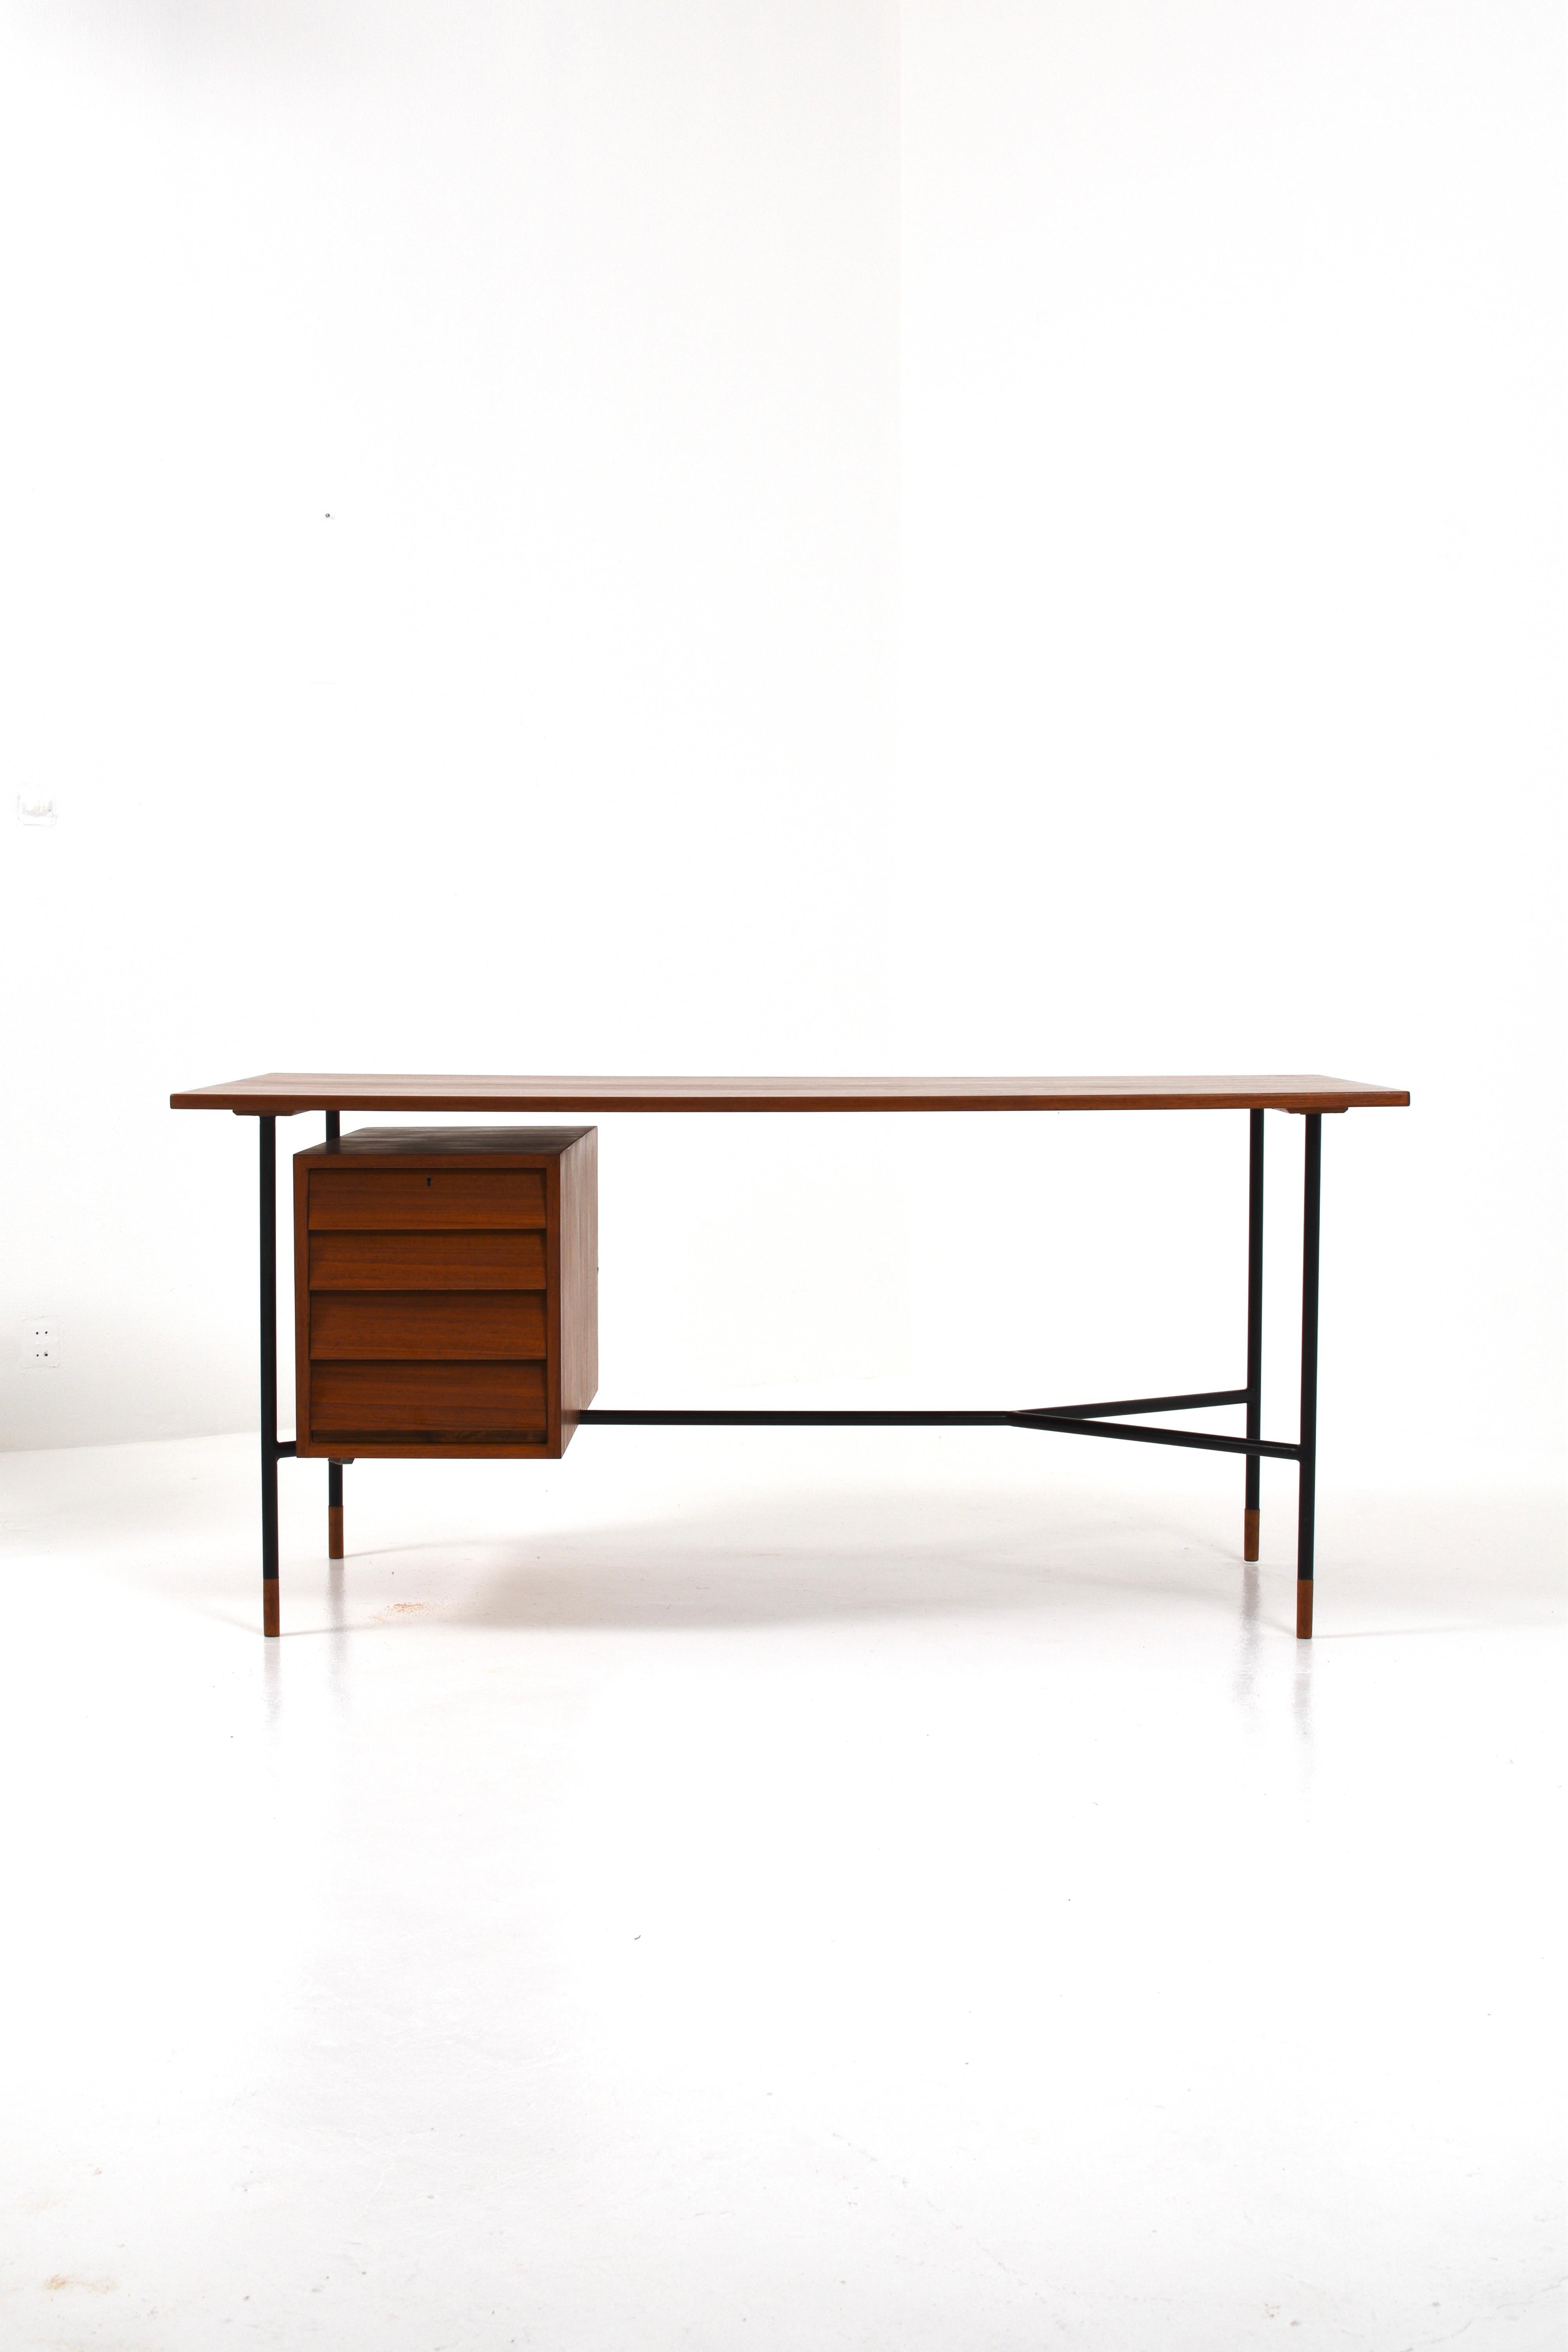 Very rare desk of Åke Hassbjer!

During his career, Åke Hassbjer would create models and environments for several different manufacturers. He has designed several pieces of furniture for, among others, DUX.

Already in the mid-1950s, he designed